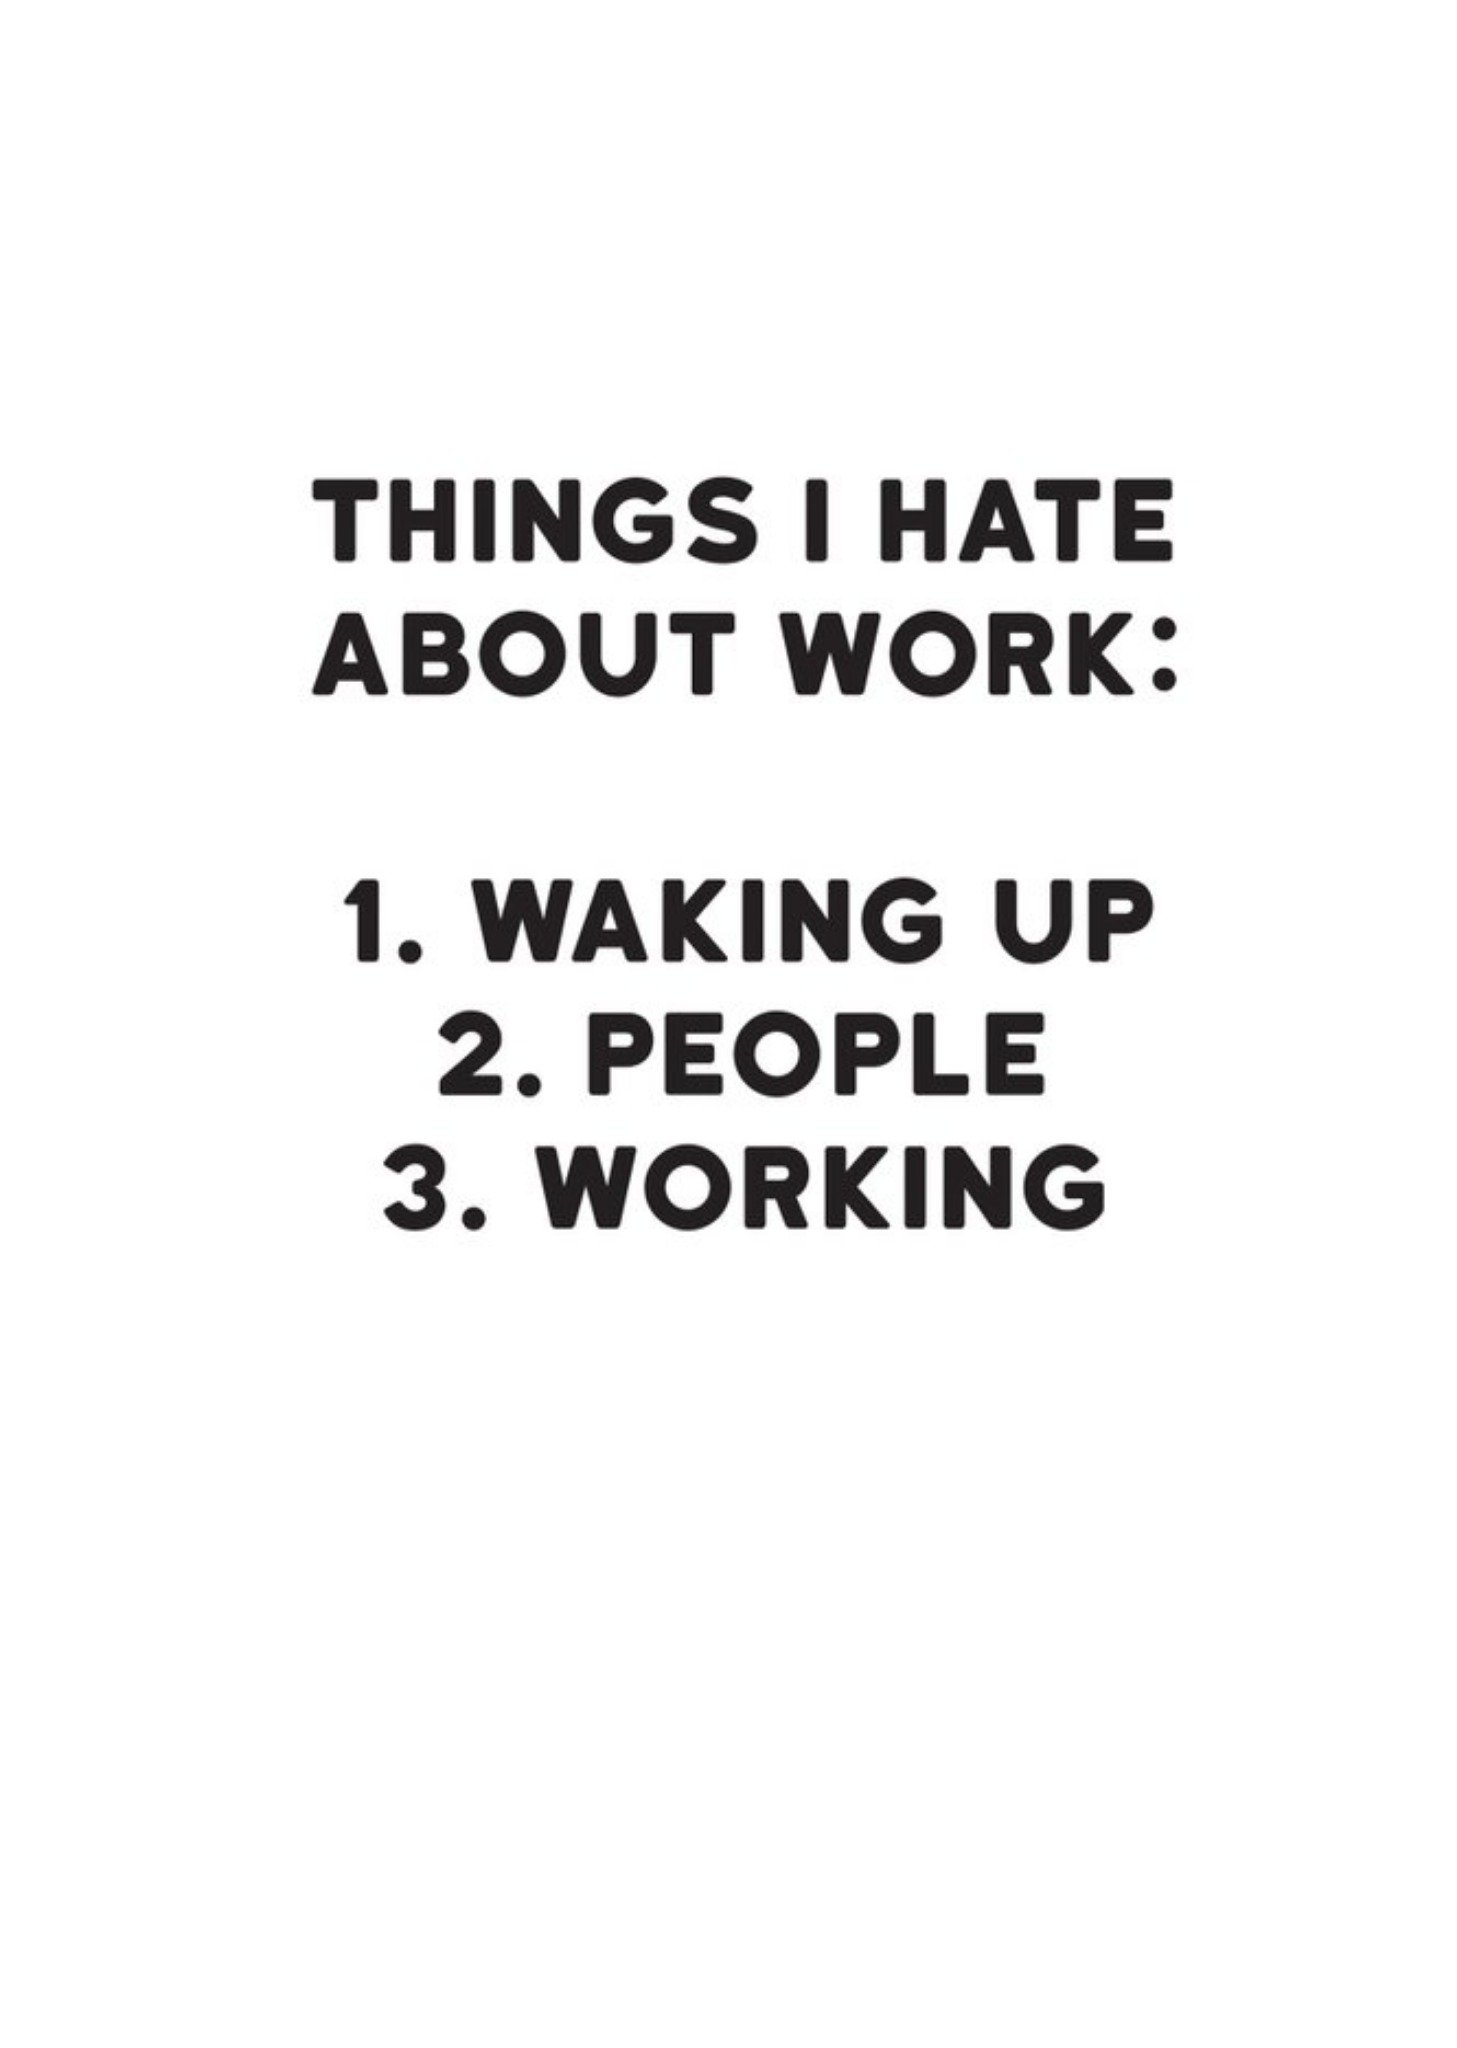 Moonpig Modern Funny Typographical Things I Hate About Work Card, Large